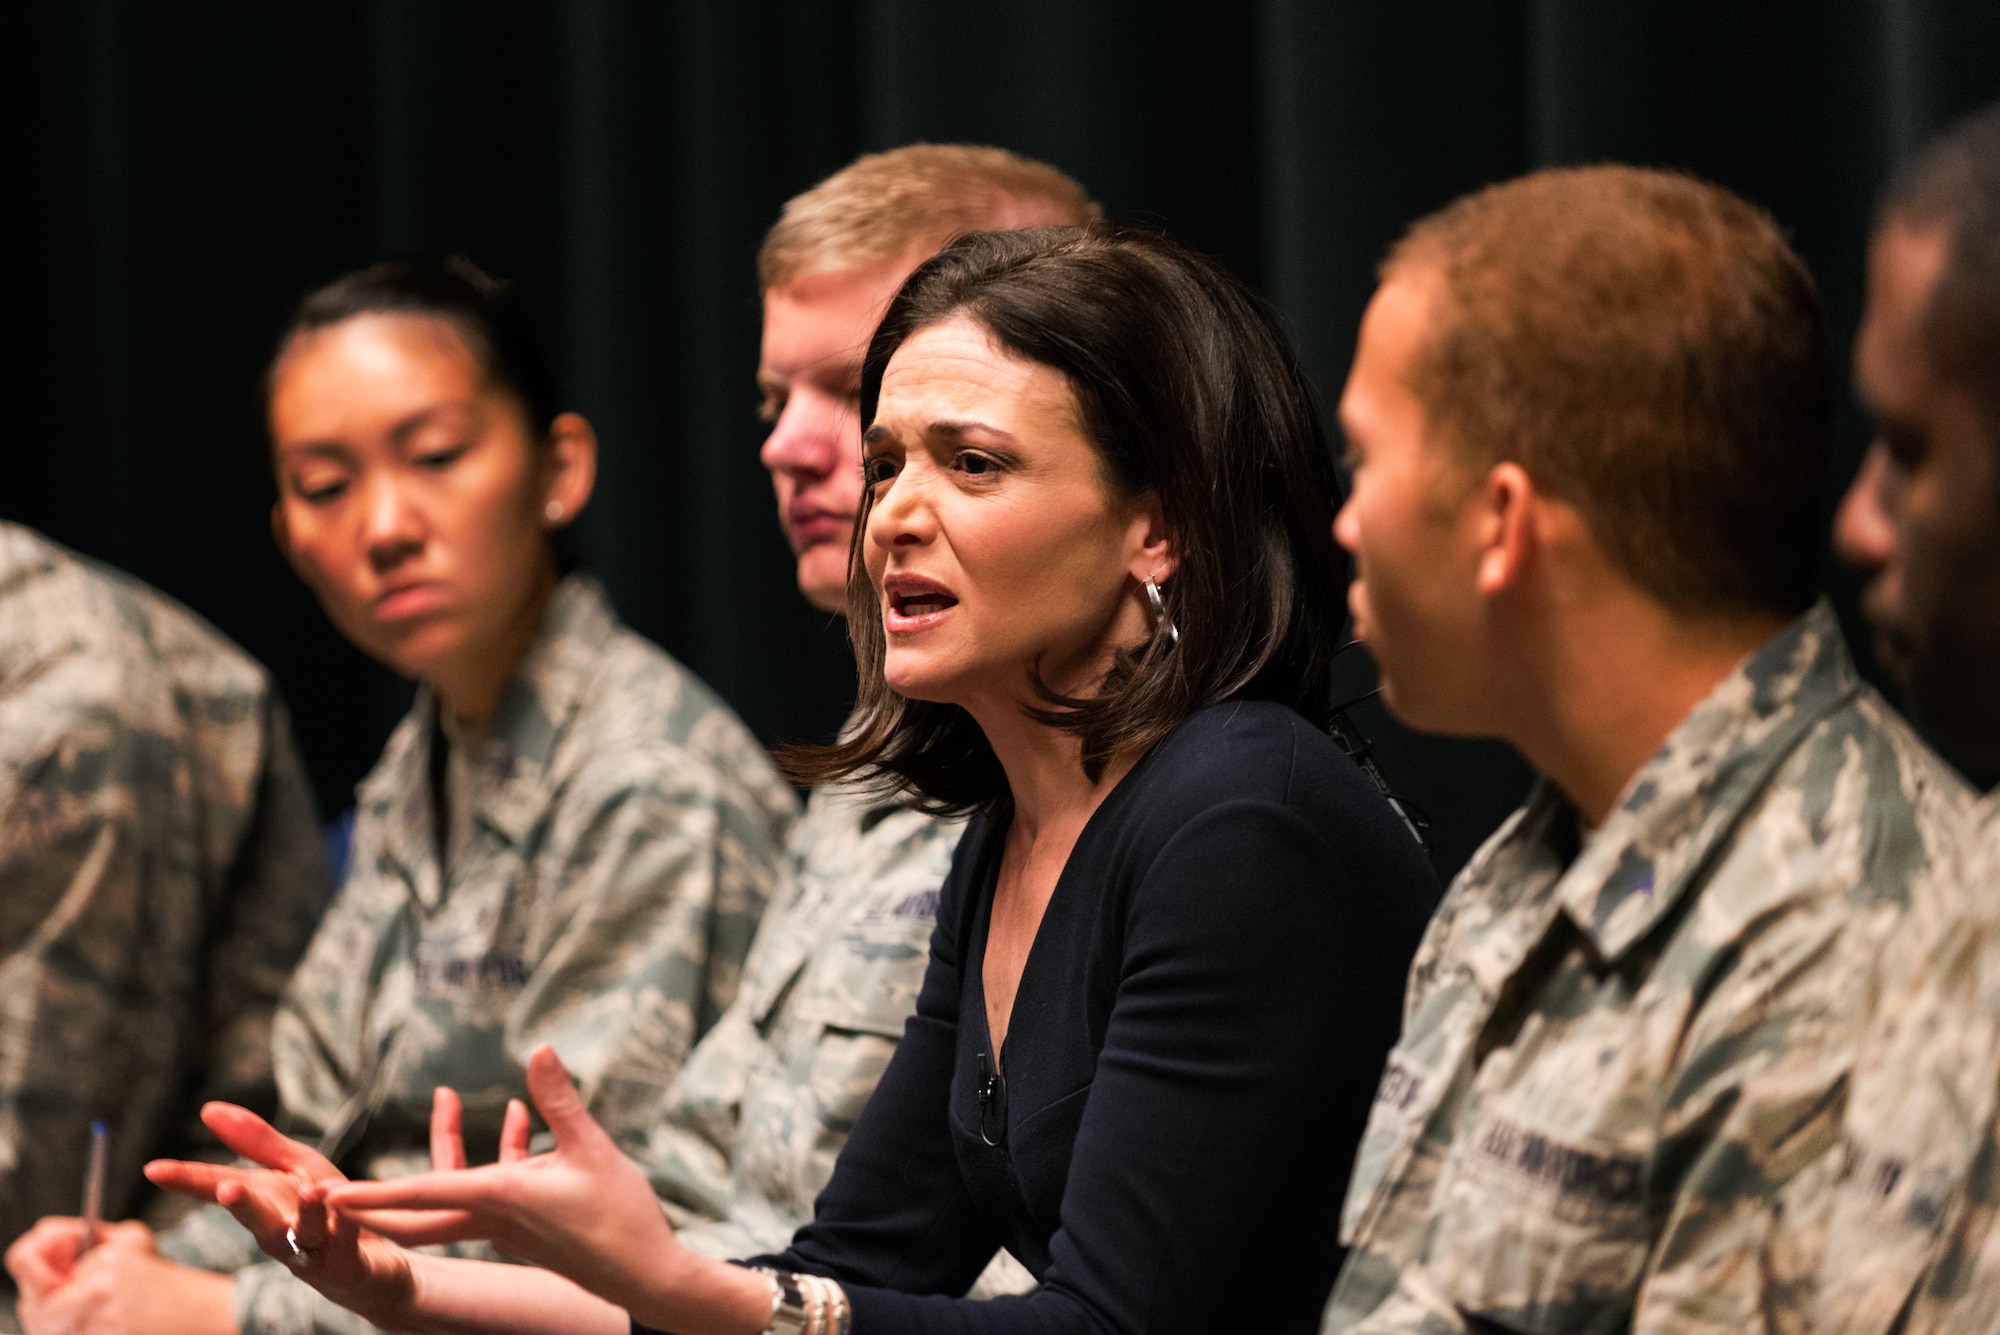 Sheryl Sandberg, the chief operating officer of Facebook, chats with cadets on the stage at Arnold Hall Nov. 6, 2015. Sandberg was at the Air Force Academy to discuss Lean-In Circles, a peer networking program she created that is being used by the Defense Department. (U.S. Air Force photo/Liz Copan)